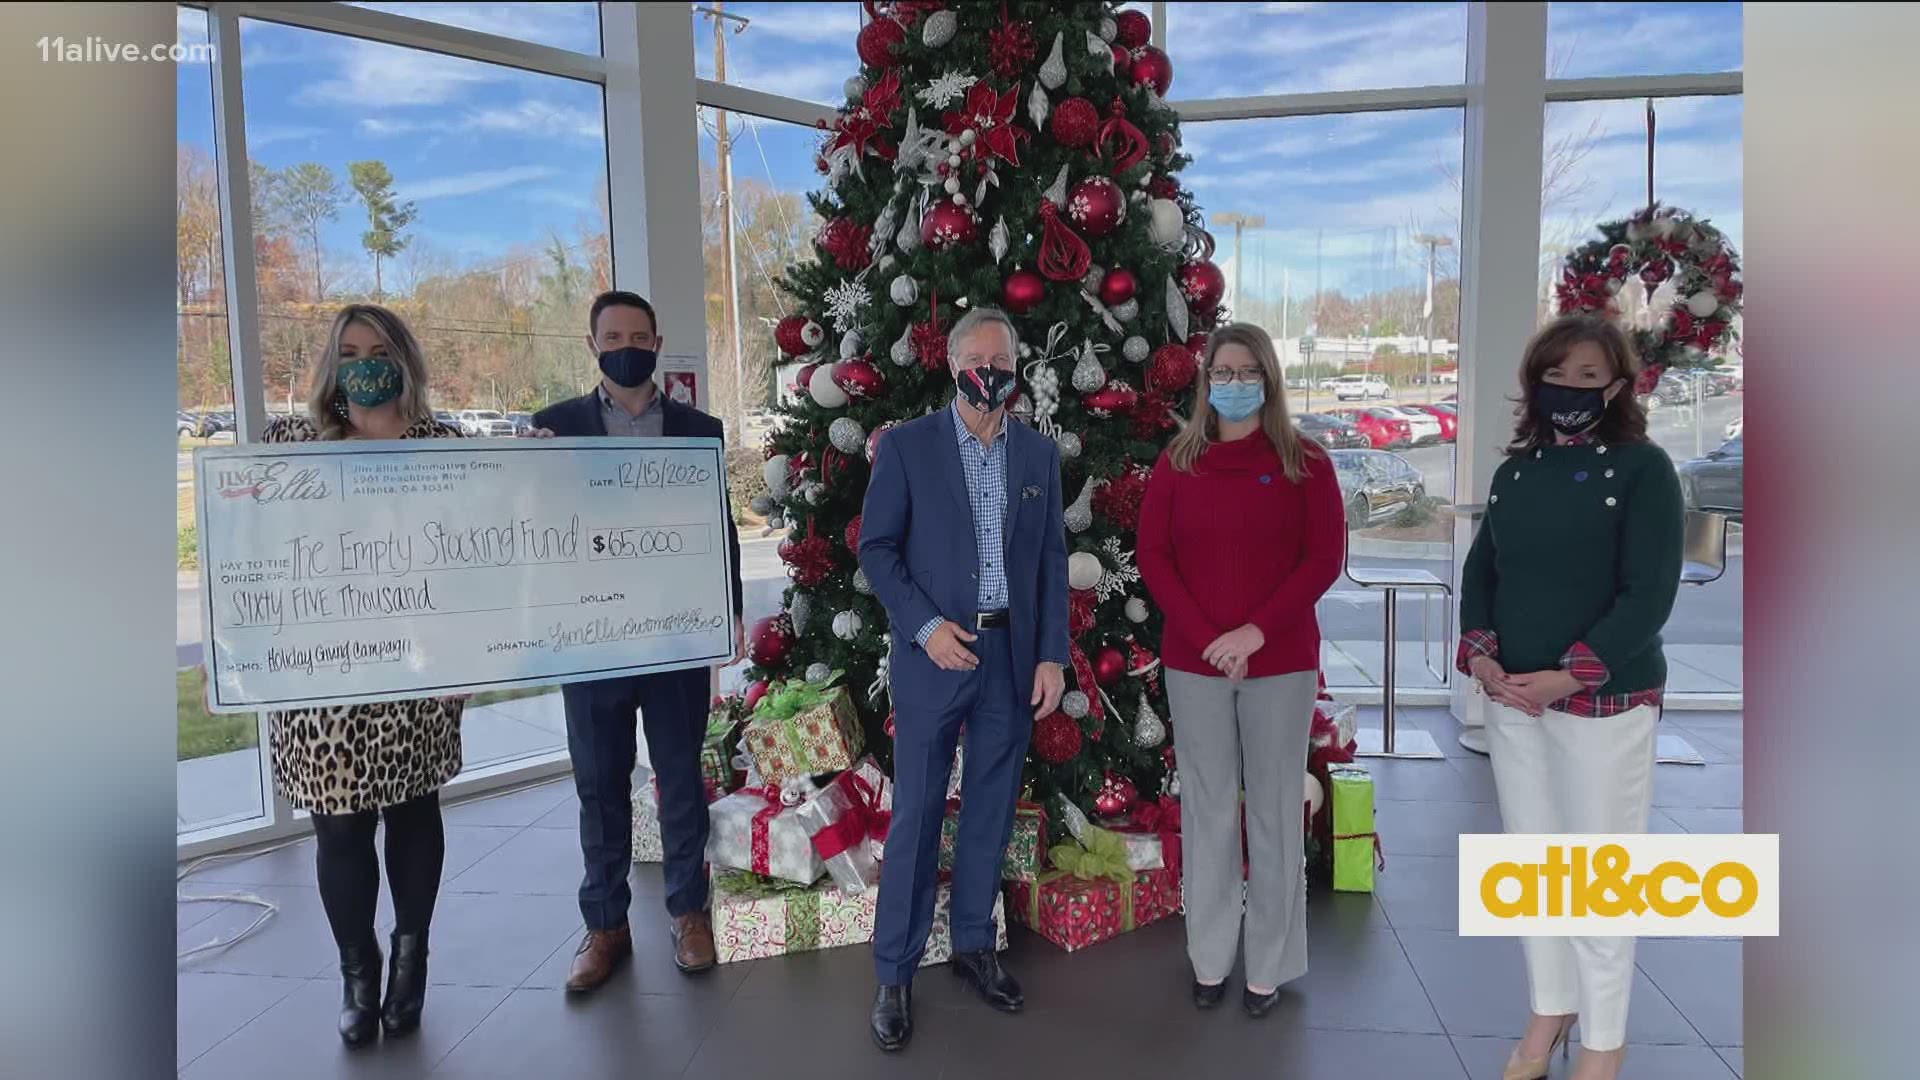 Brighten the holidays for children in need! Jim Ellis Automotive donated $65,000 to the Empty Stocking Fund to bring joy to the lives of disadvantaged children.